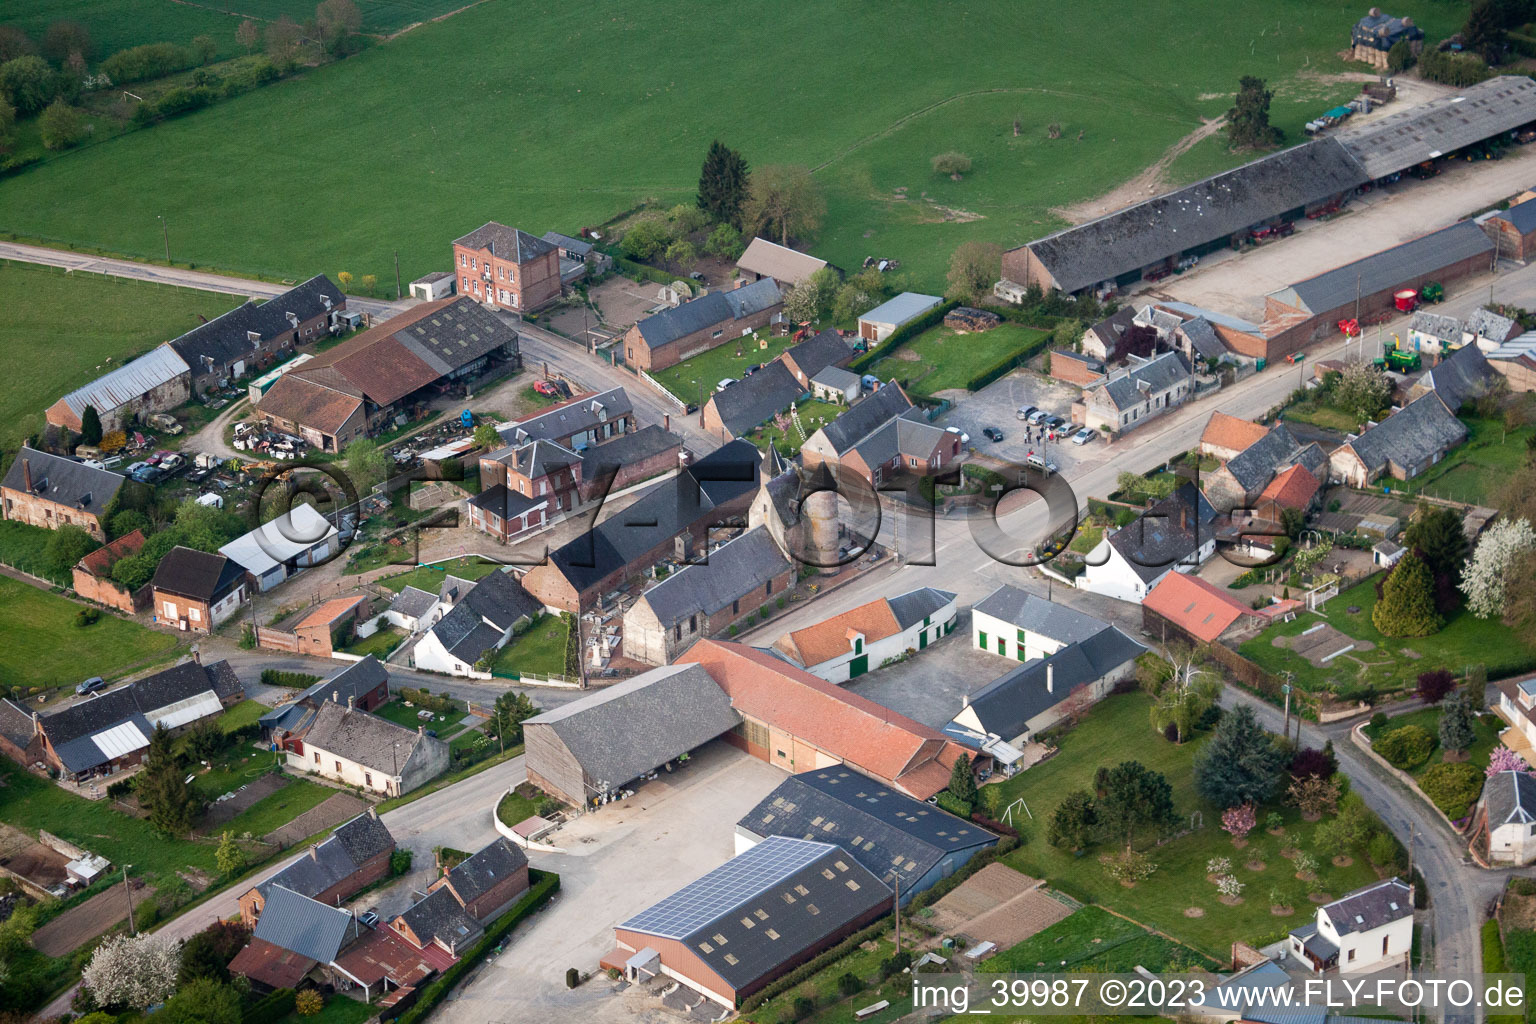 Aerial view of Monceau-sur-Oise in the state Aisne, France